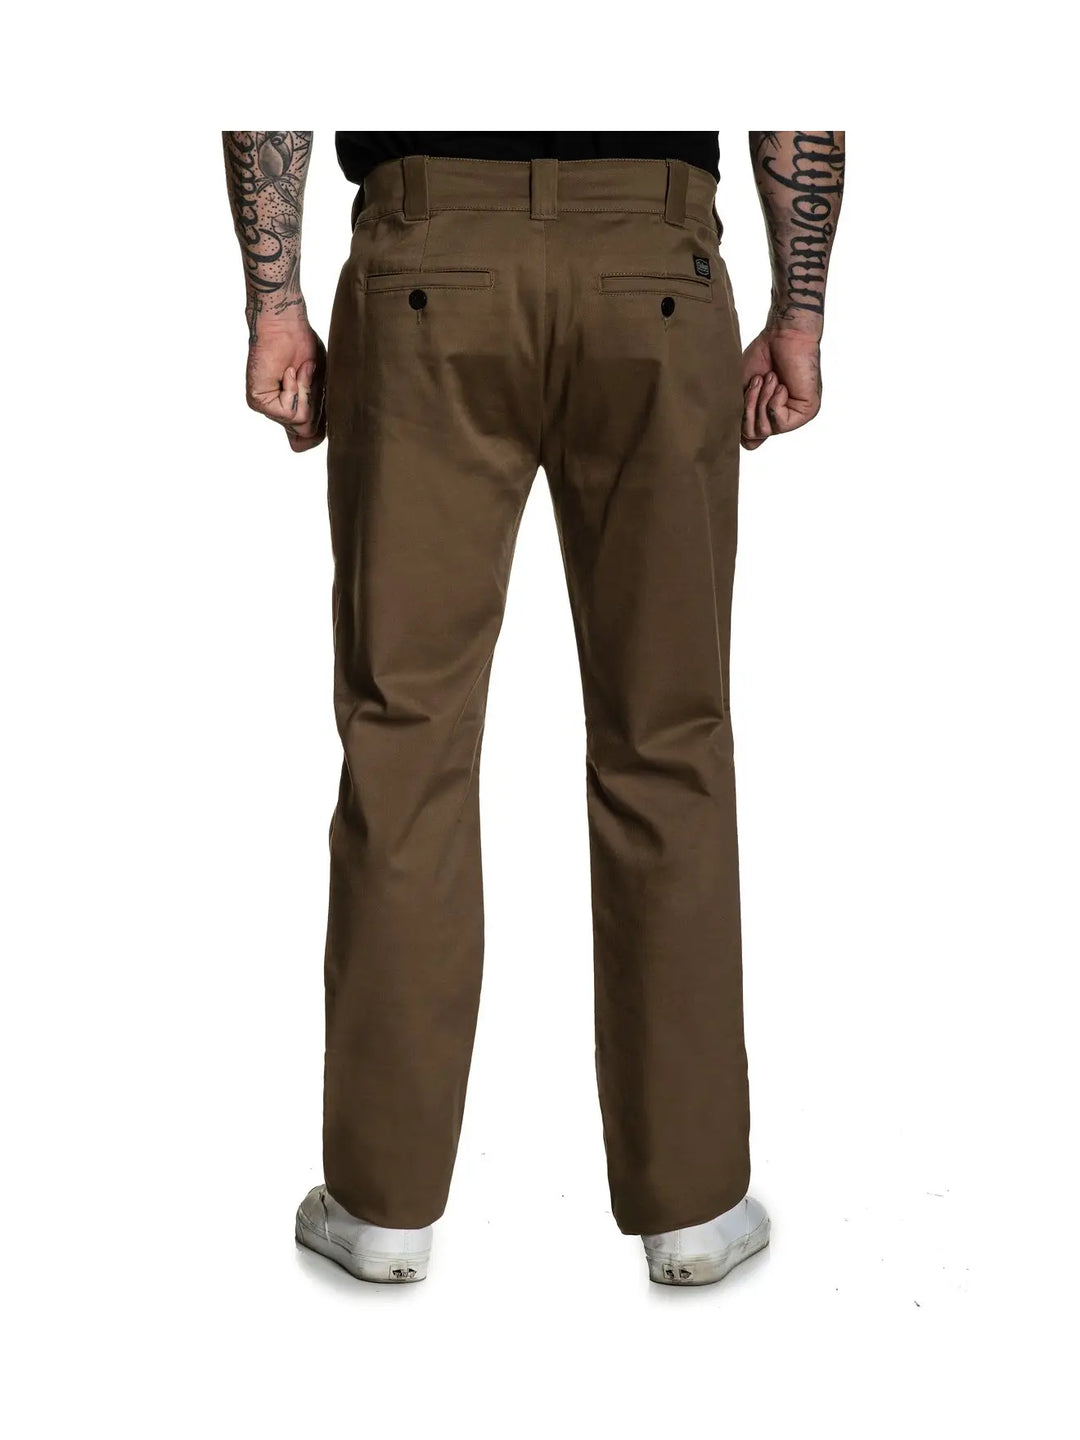 925 Relaxed fit Chino Stretch Pant - CUB